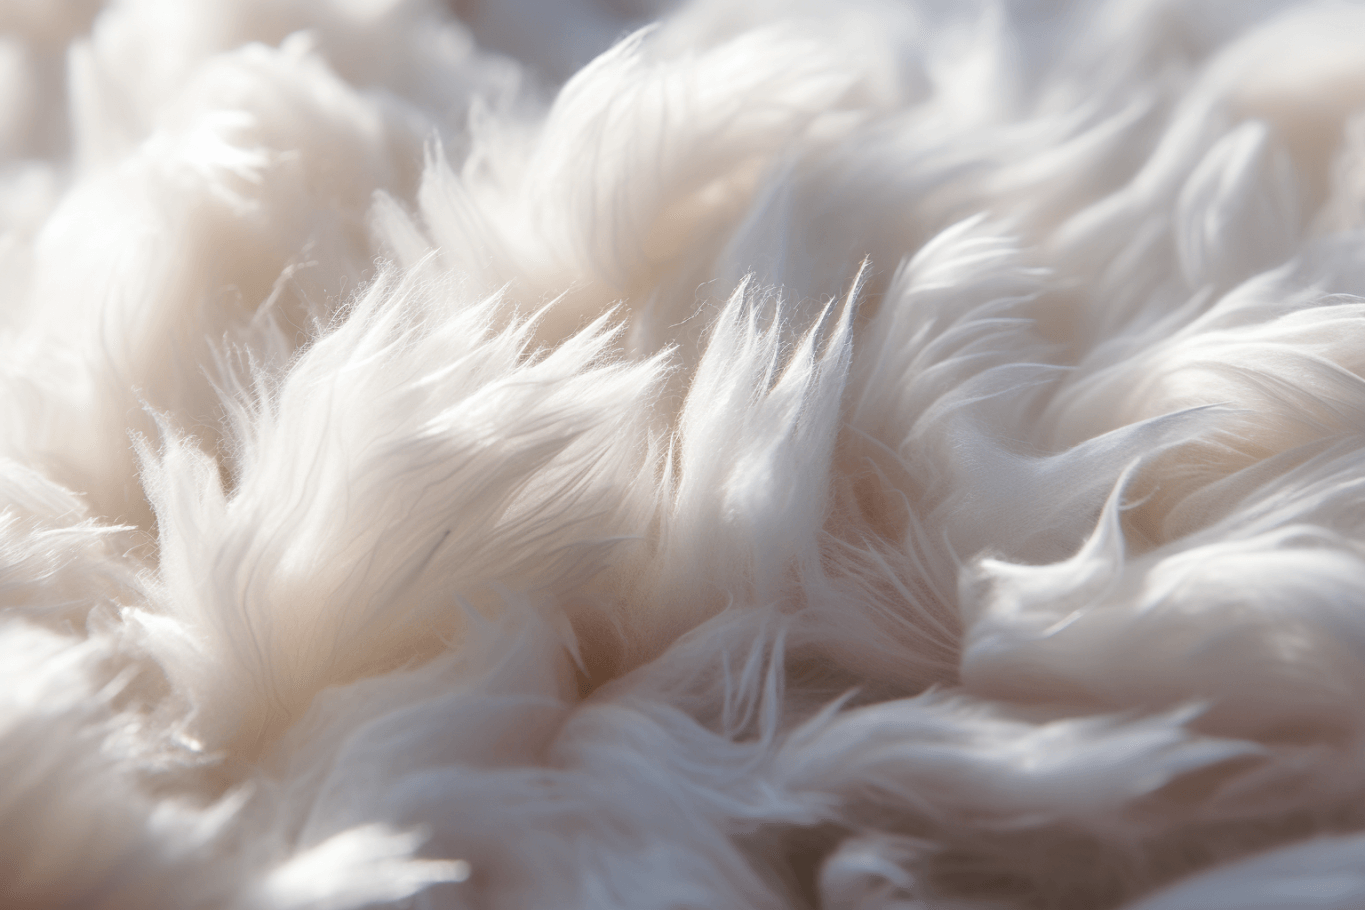 The Absorption Properties Of Cotton and Why It's Bad for Skin – Nollapelli